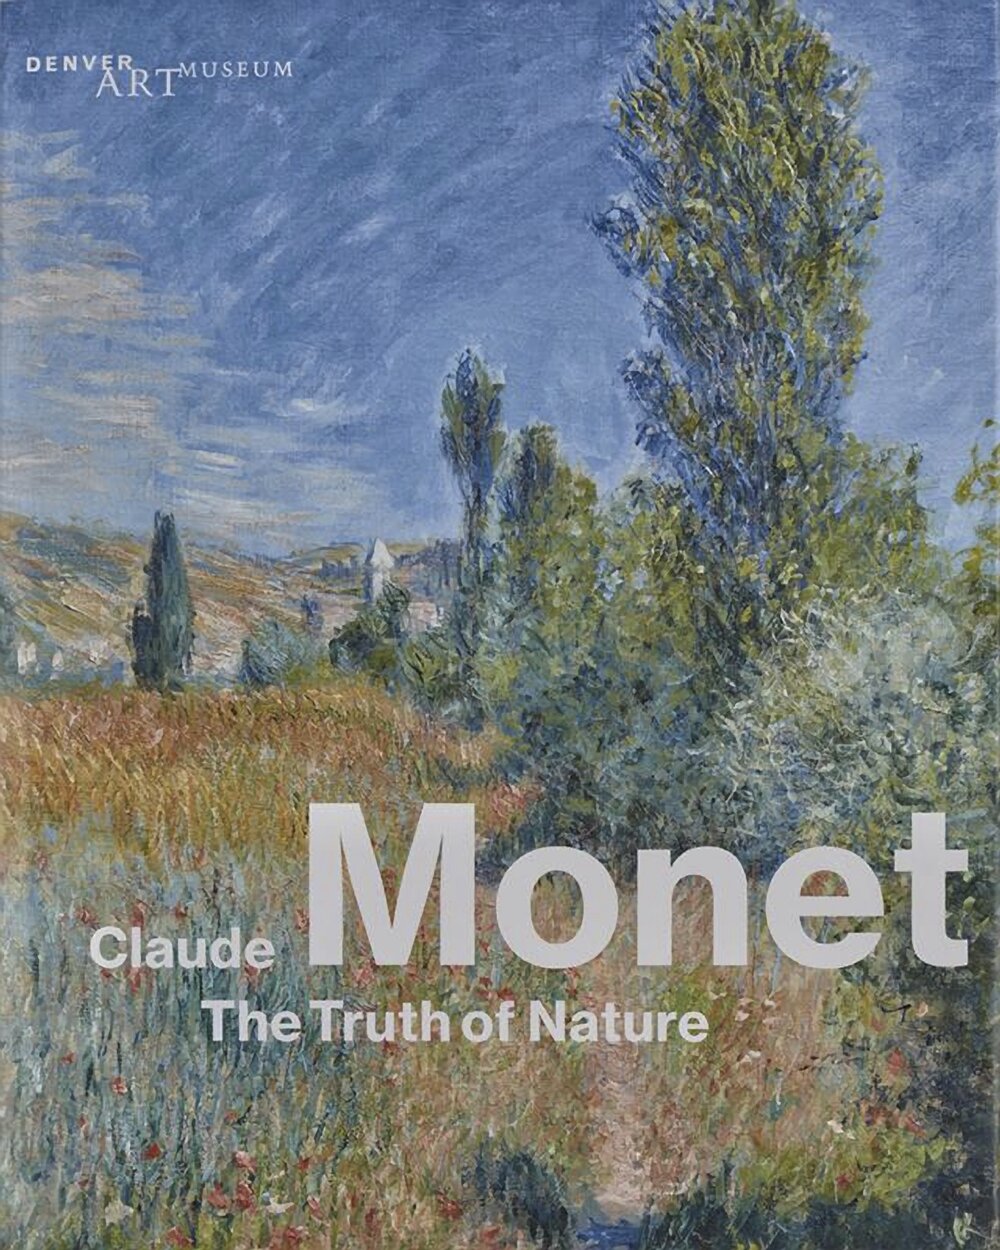 Claude Monet - The Truth of Nature Catalog of Exhibited Works